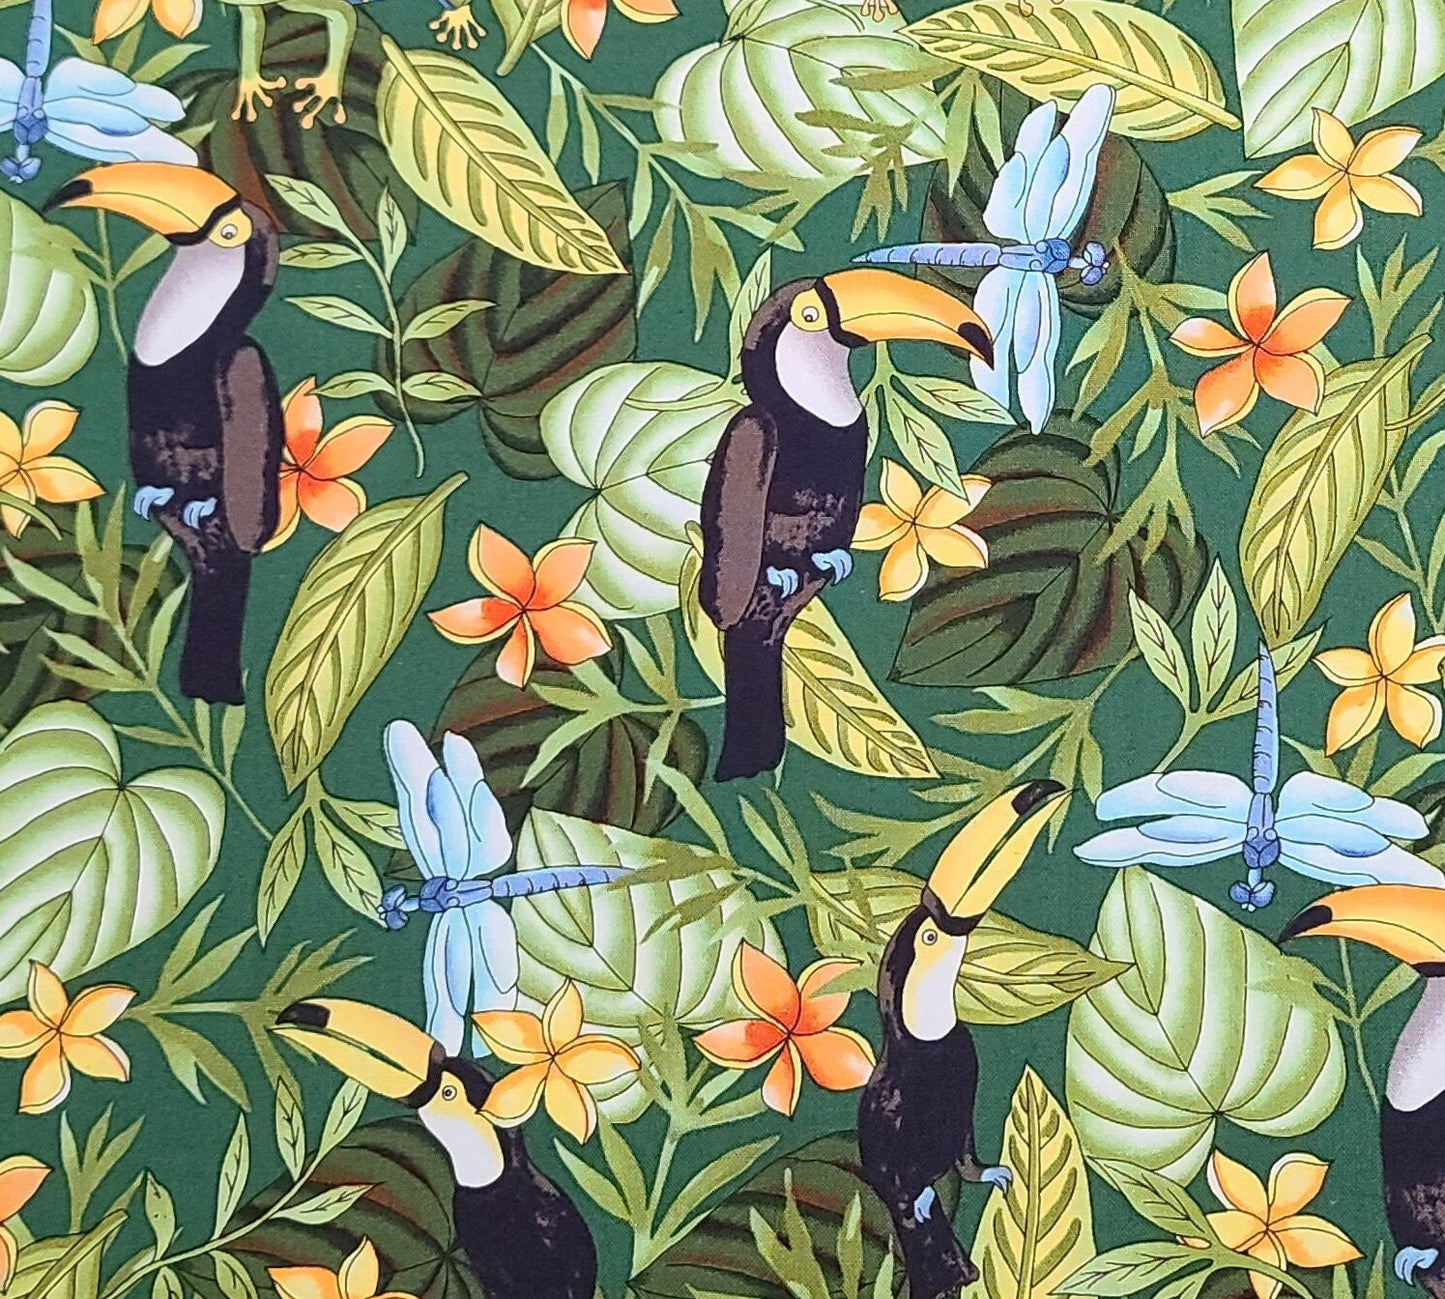 Beth Ann Bruske for David Textiles Inc - Primary Green Fabric / Toucan, Tree Frog, Dragonfly and Flower Jungle Print